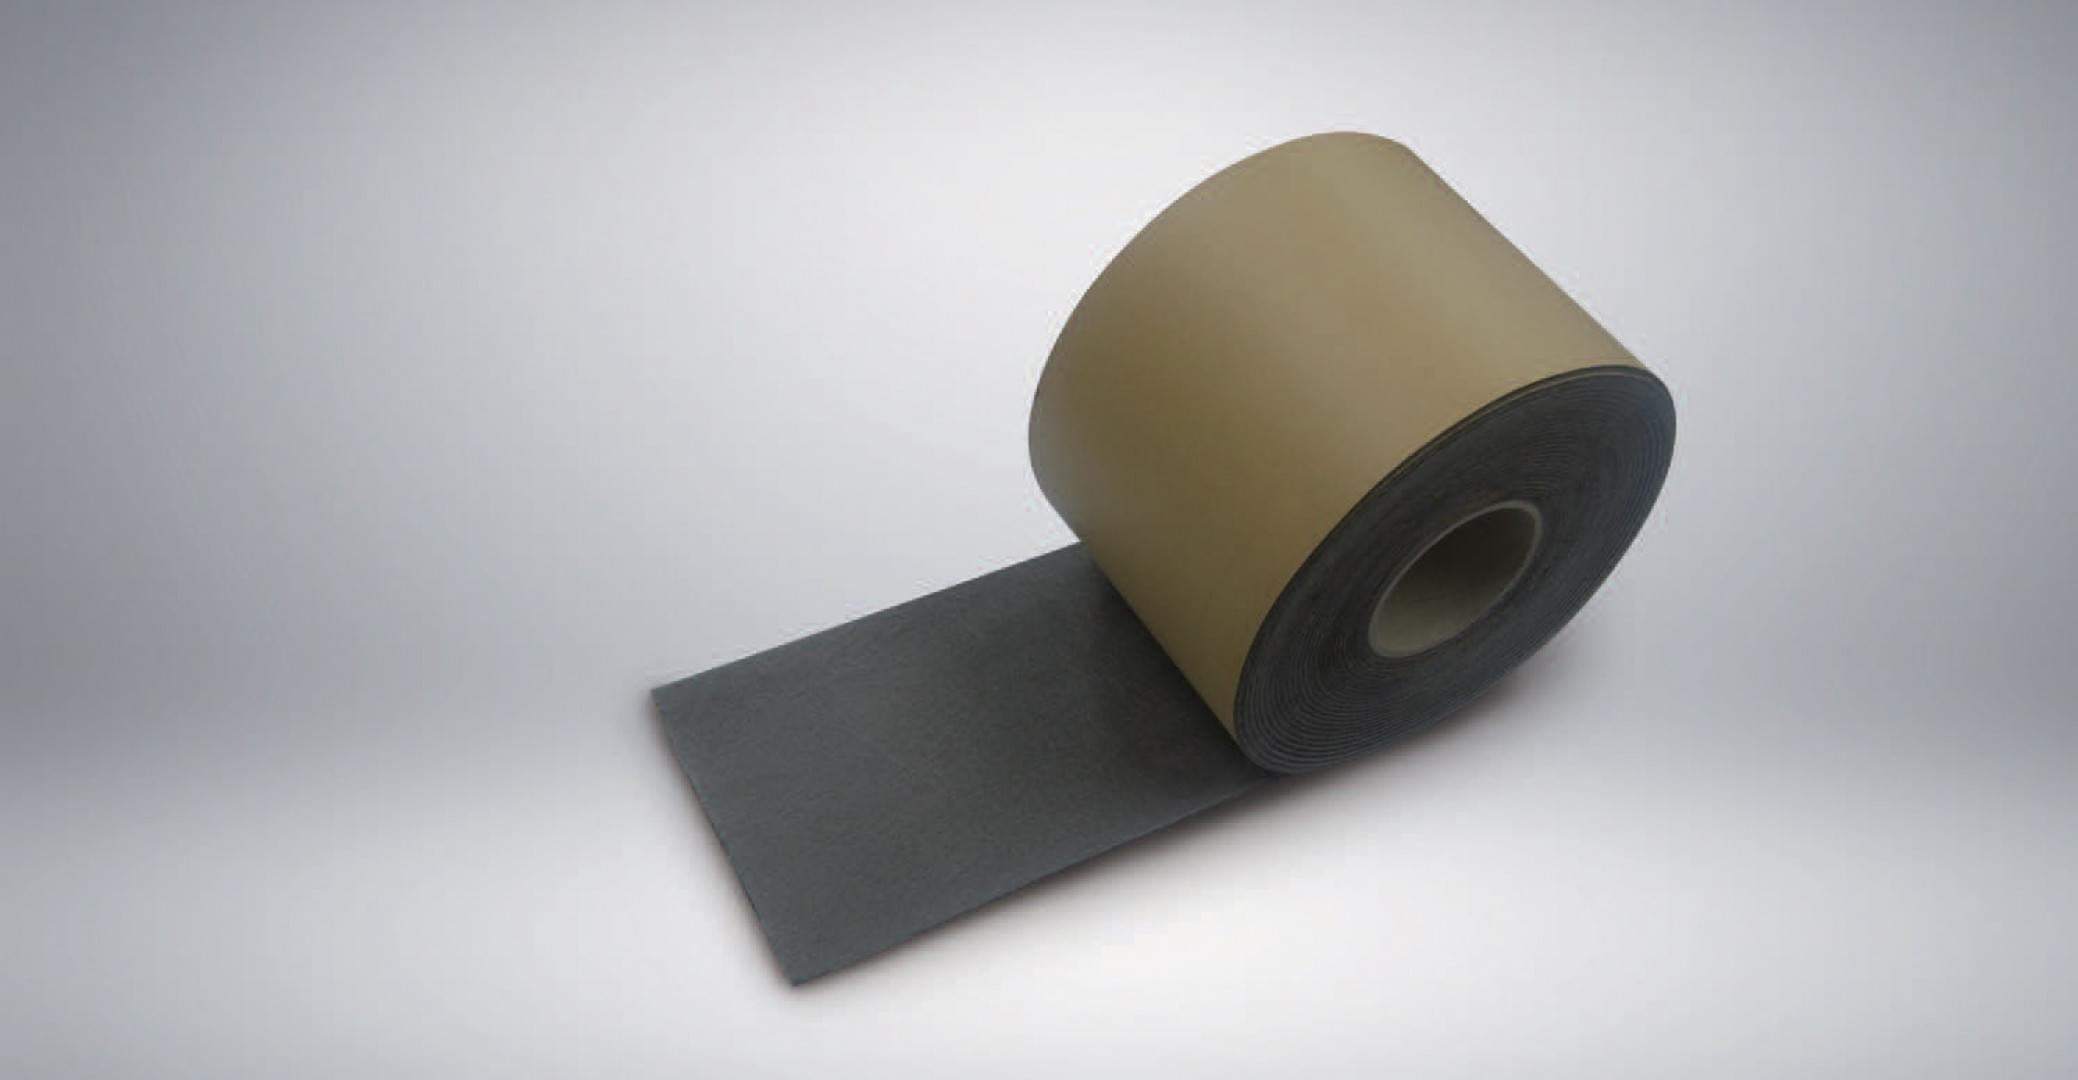 EZ-Road Tape from Mega Technical Resources Limited